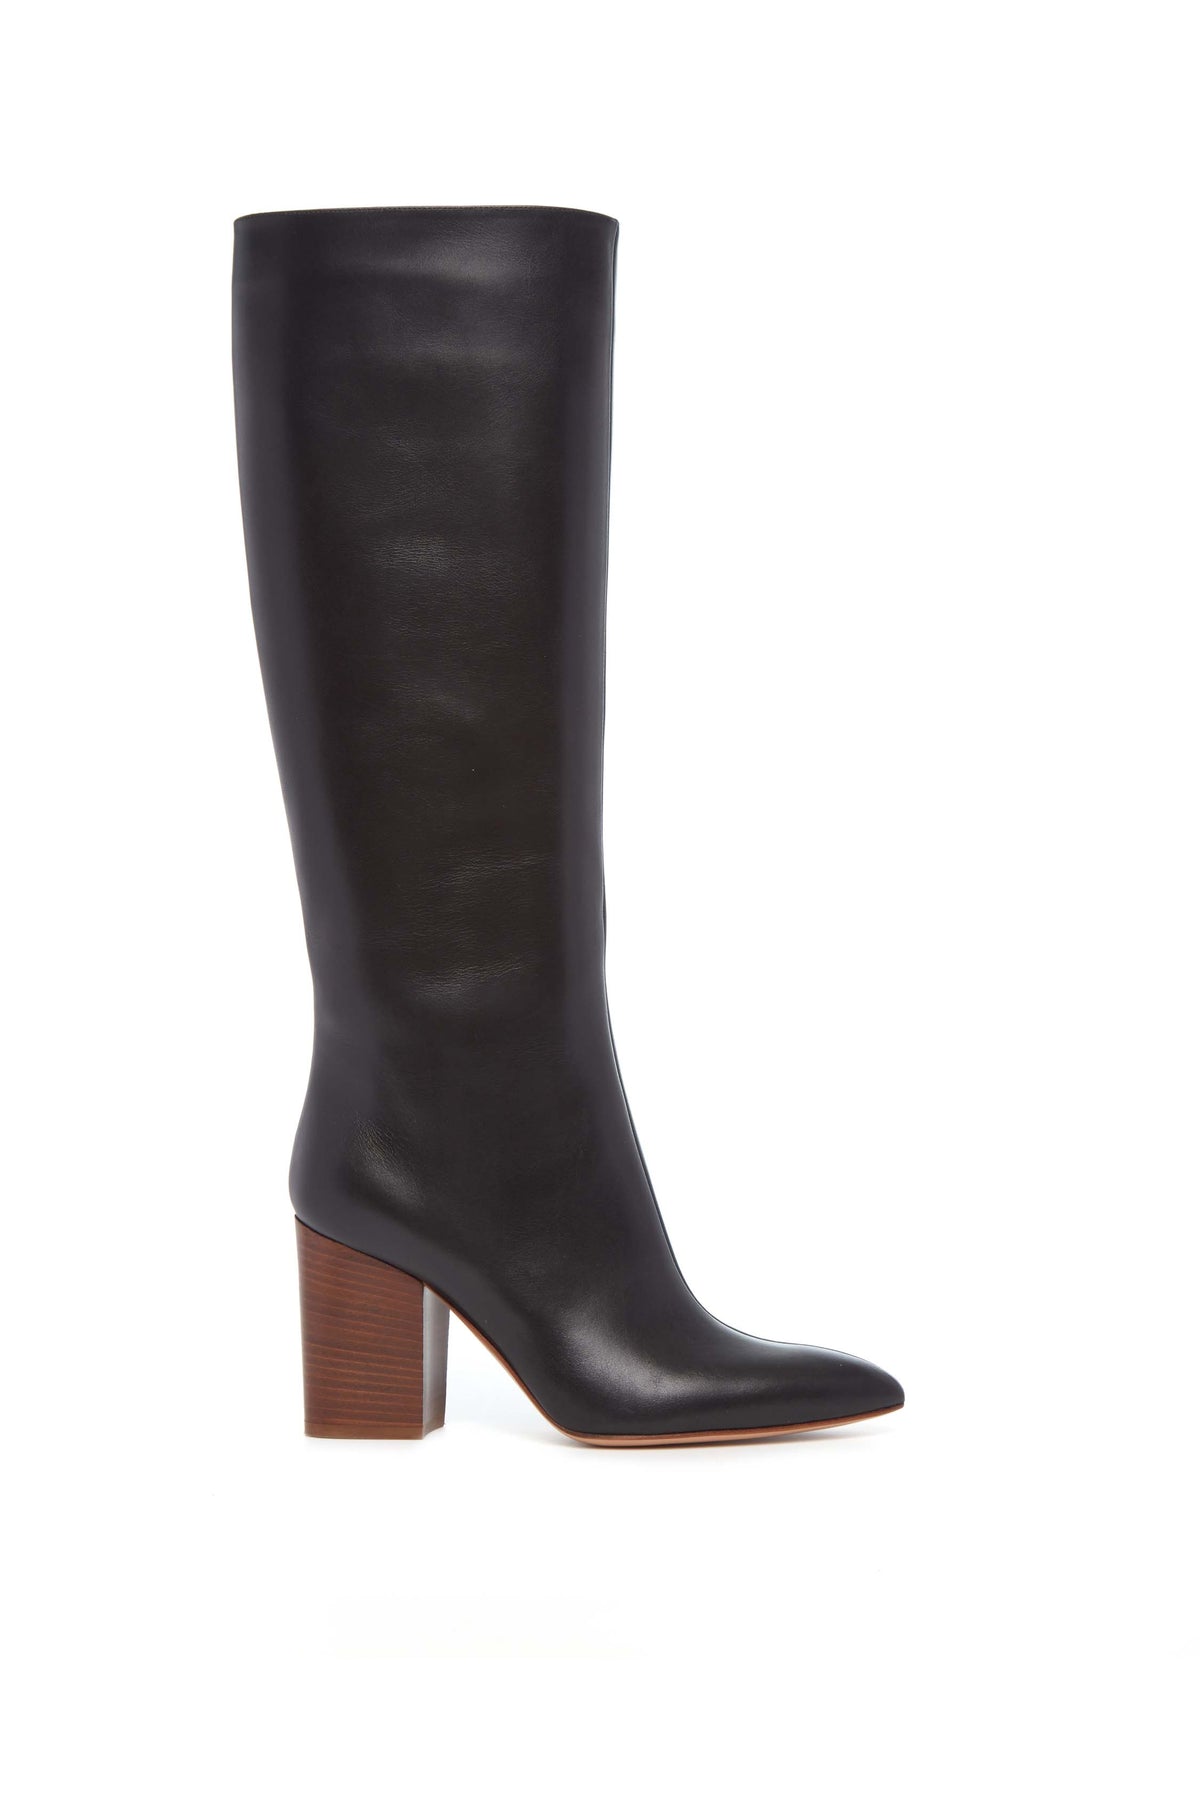 Sascha Knee High Boot in Black Leather